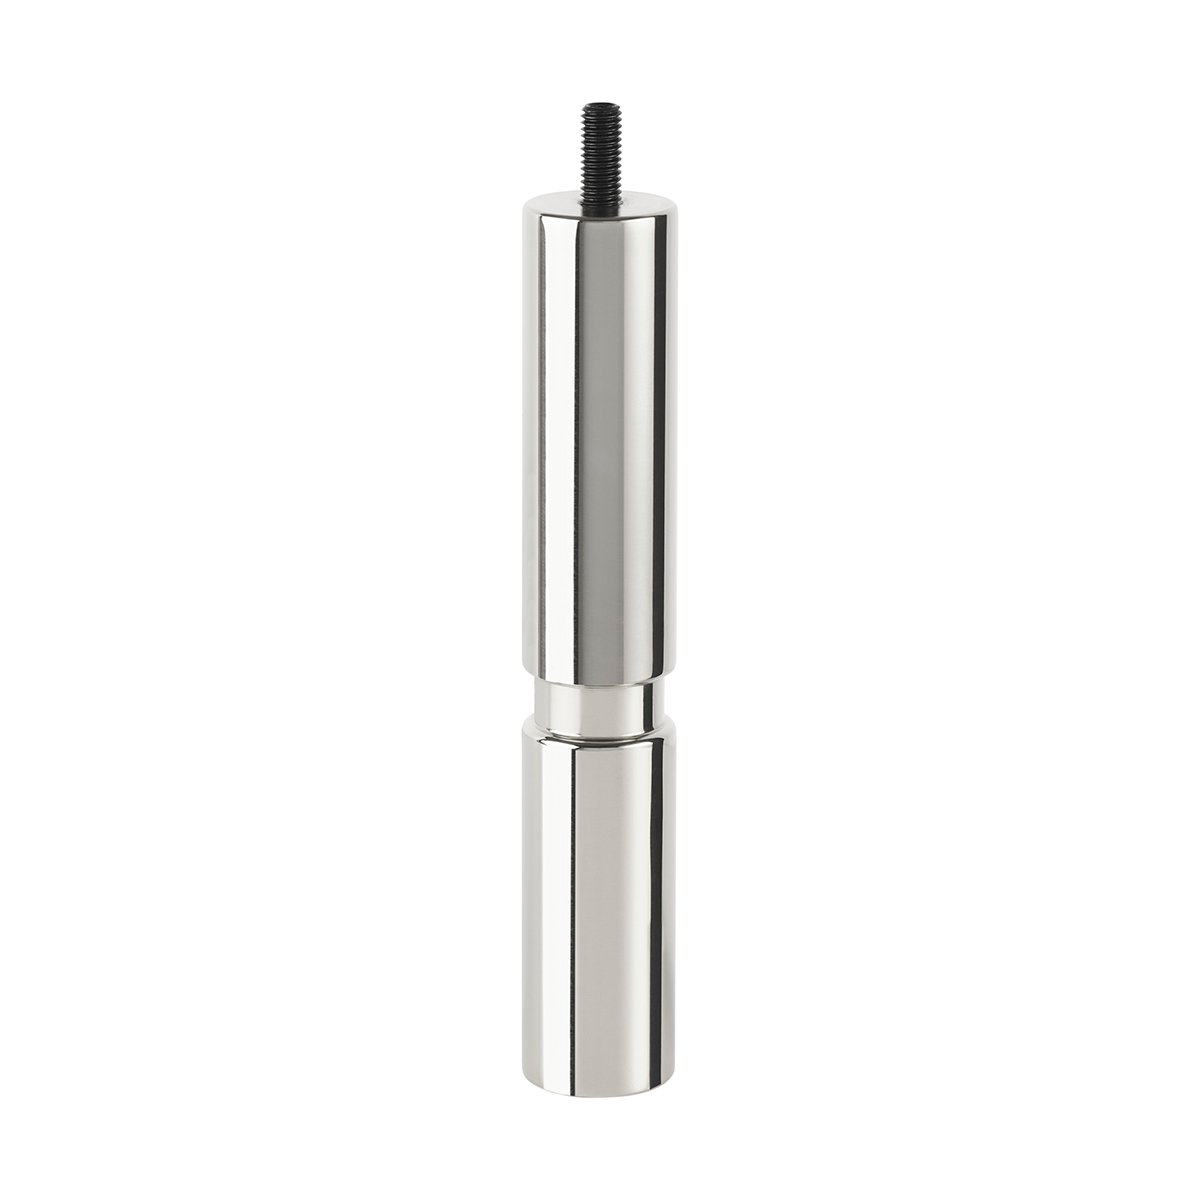 Thelma cylindrical stand 170mm Polished stainless steel